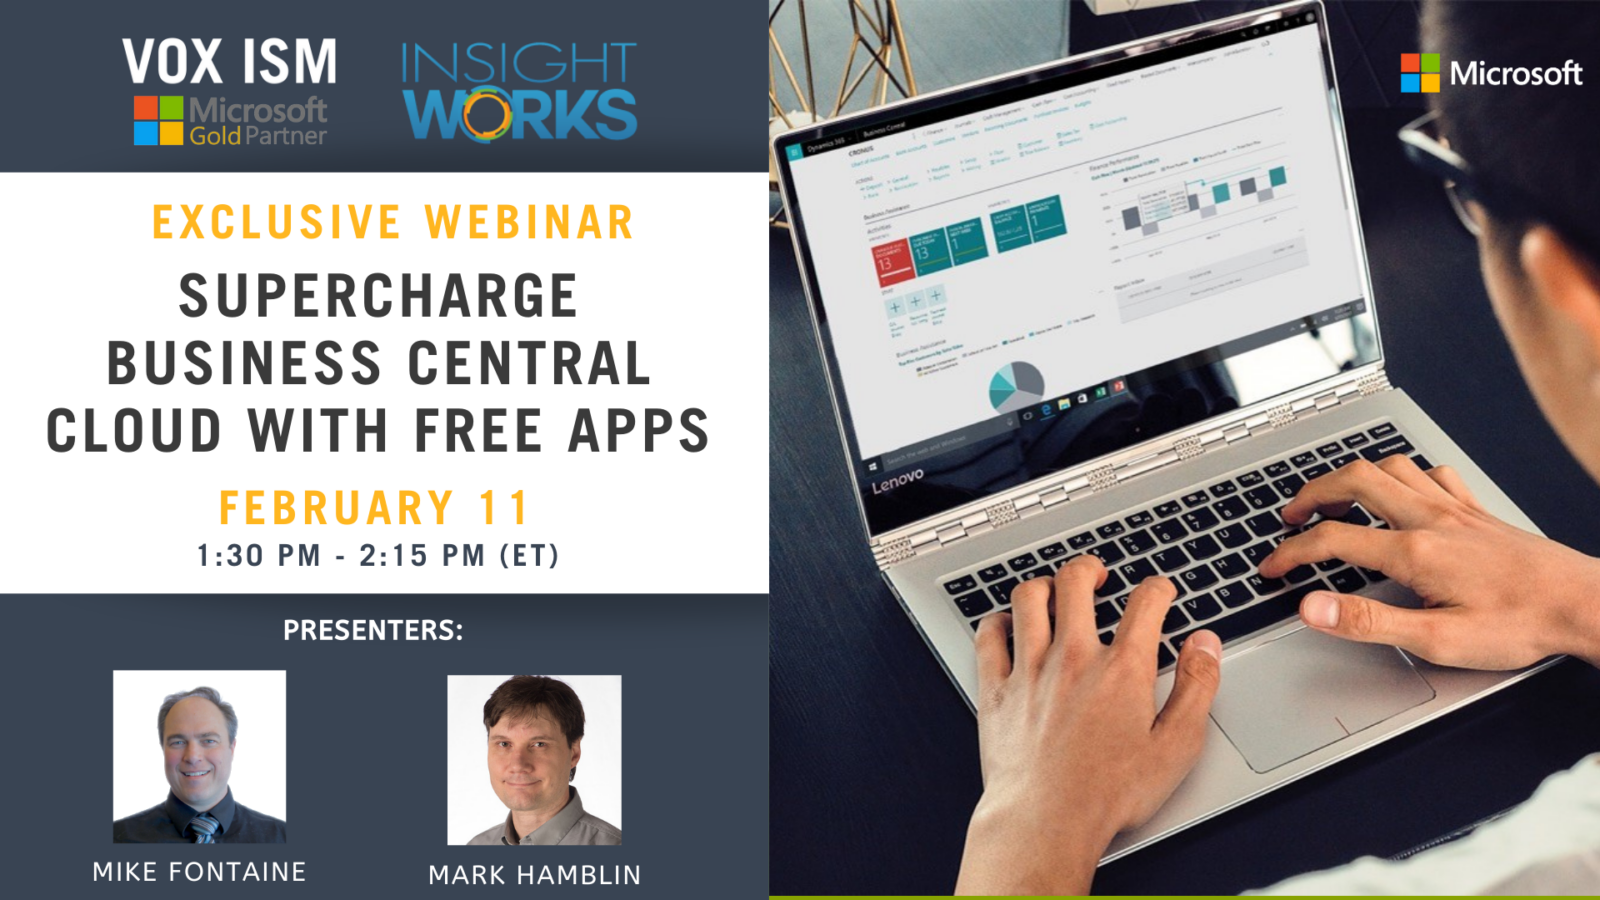 Supercharge Business Central Cloud with Free Apps - February 11 - Webinar